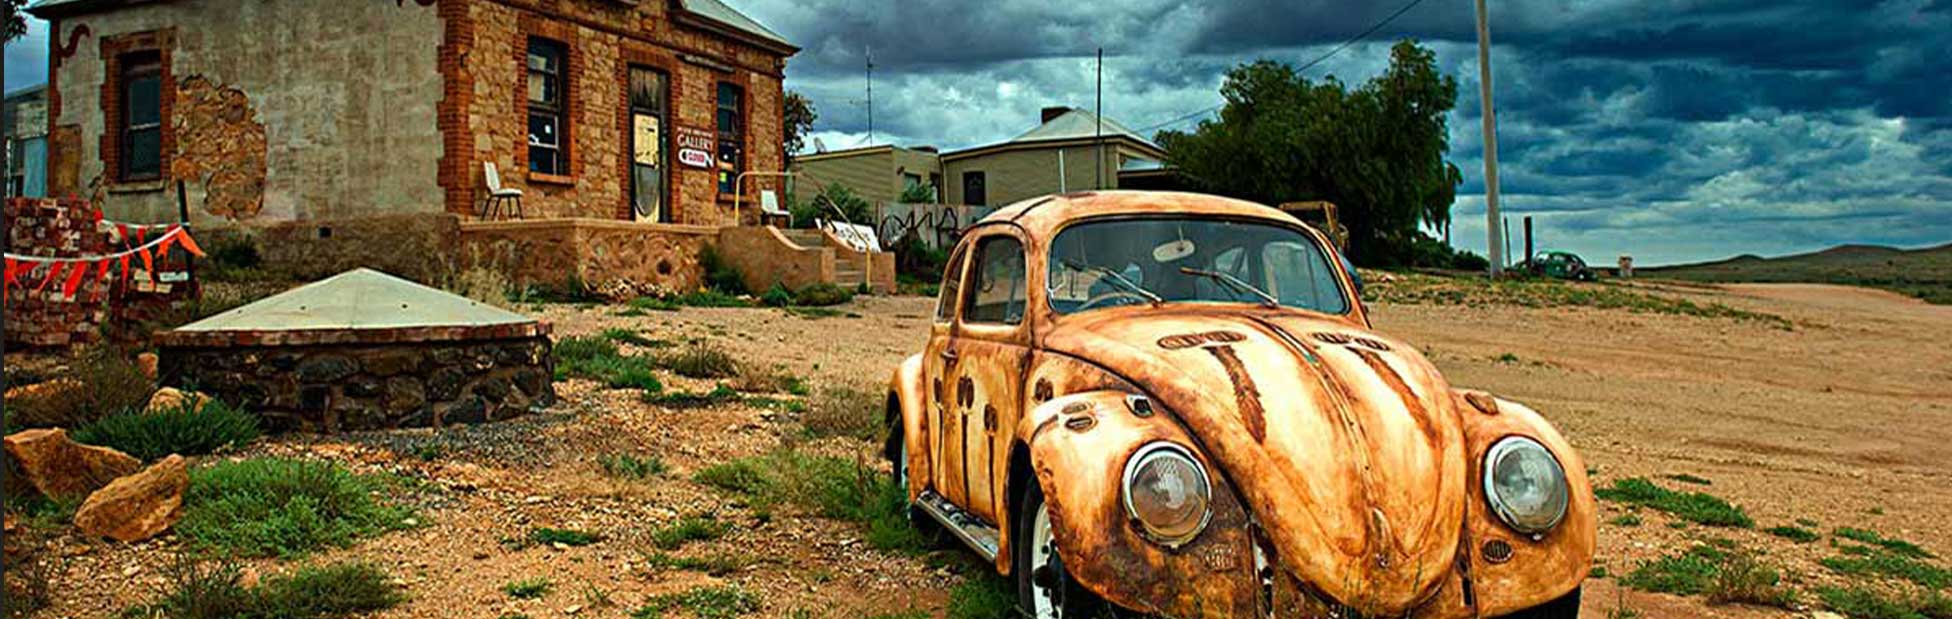 VW Beetle in outback setting